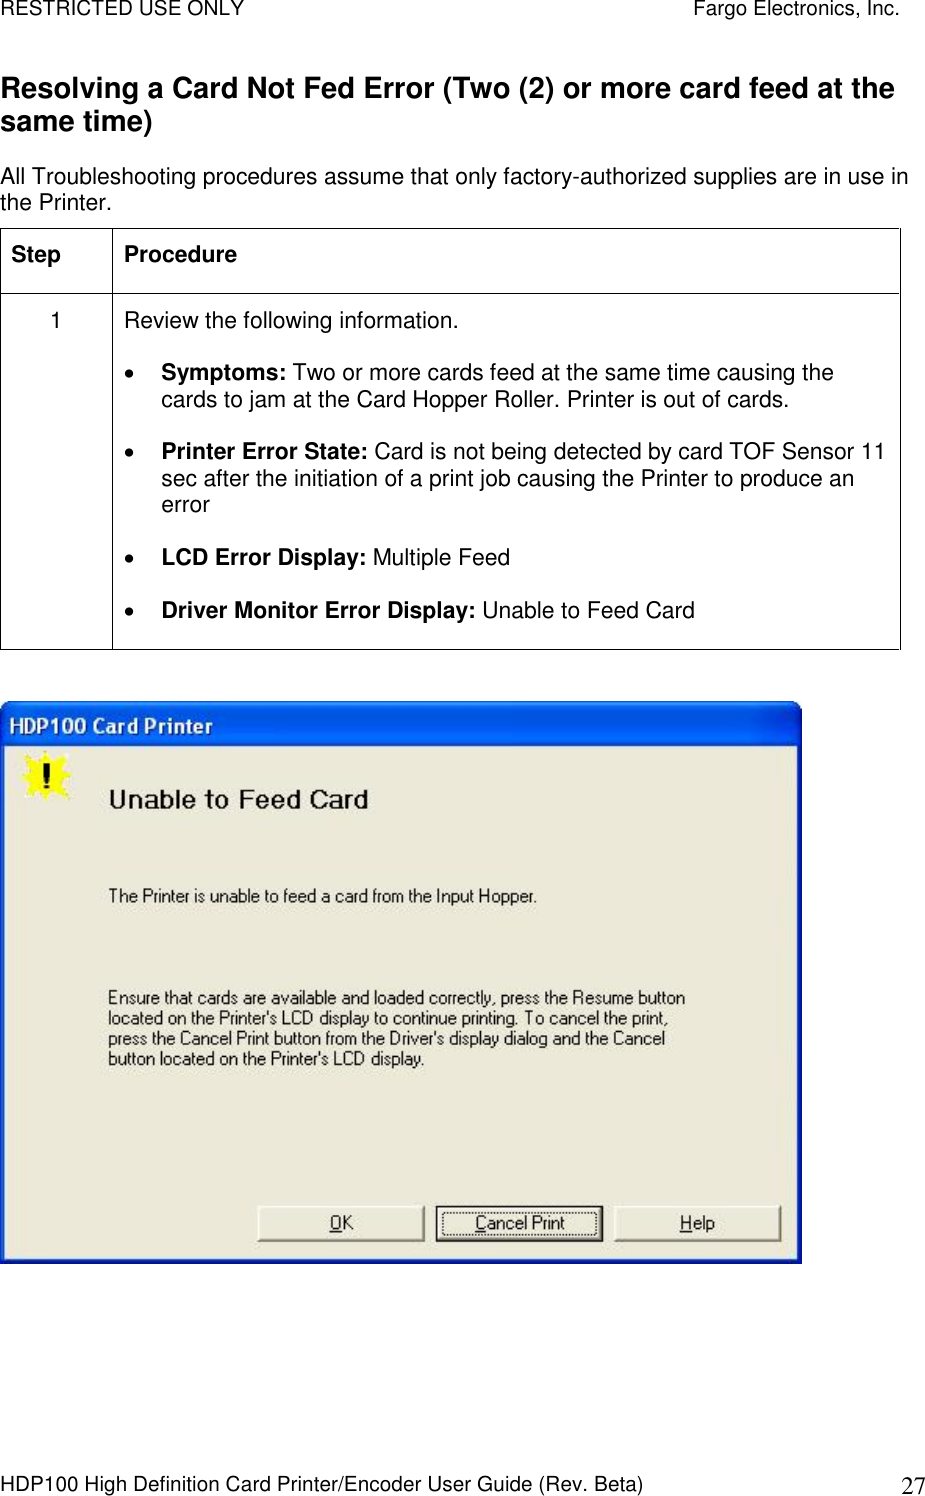 RESTRICTED USE ONLY    Fargo Electronics, Inc. HDP100 High Definition Card Printer/Encoder User Guide (Rev. Beta)  27 Resolving a Card Not Fed Error (Two (2) or more card feed at the same time) All Troubleshooting procedures assume that only factory-authorized supplies are in use in the Printer.  Step  Procedure 1  Review the following information.   Symptoms: Two or more cards feed at the same time causing the cards to jam at the Card Hopper Roller. Printer is out of cards.  Printer Error State: Card is not being detected by card TOF Sensor 11 sec after the initiation of a print job causing the Printer to produce an error  LCD Error Display: Multiple Feed  Driver Monitor Error Display: Unable to Feed Card    